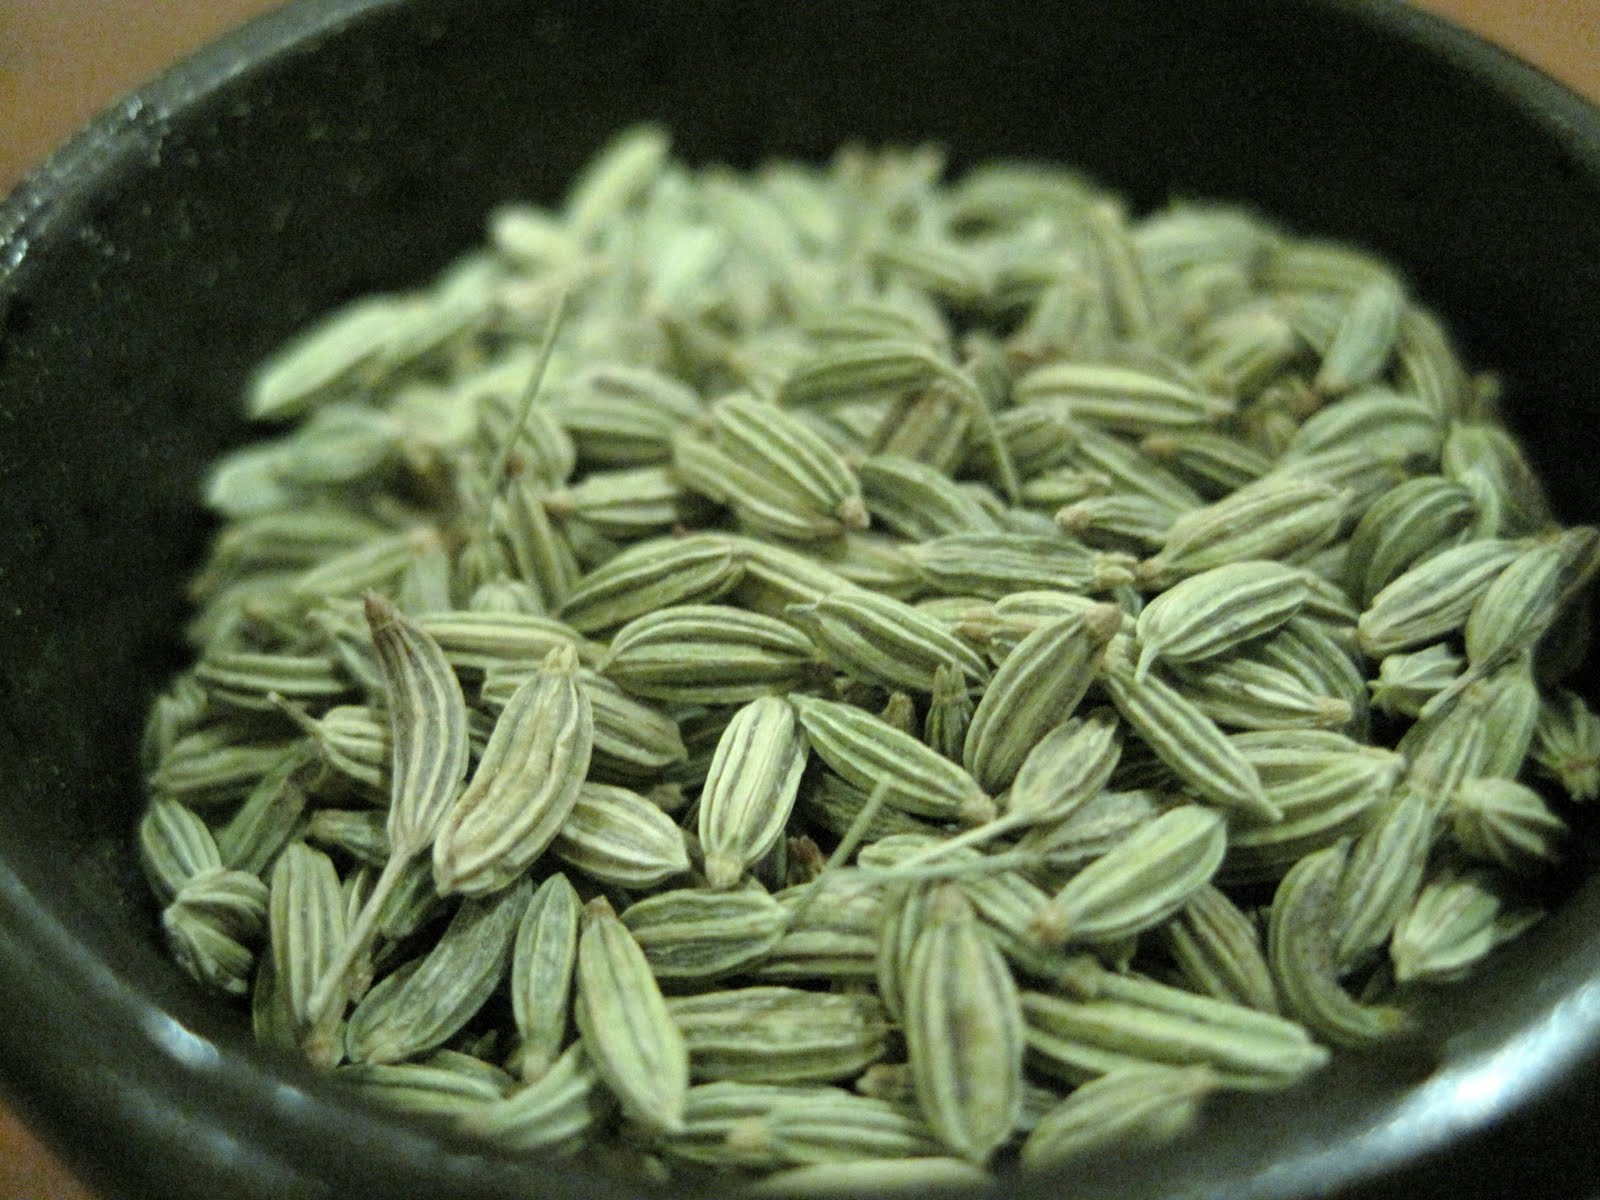 Small Fennel Seeds have Big Health Benefits